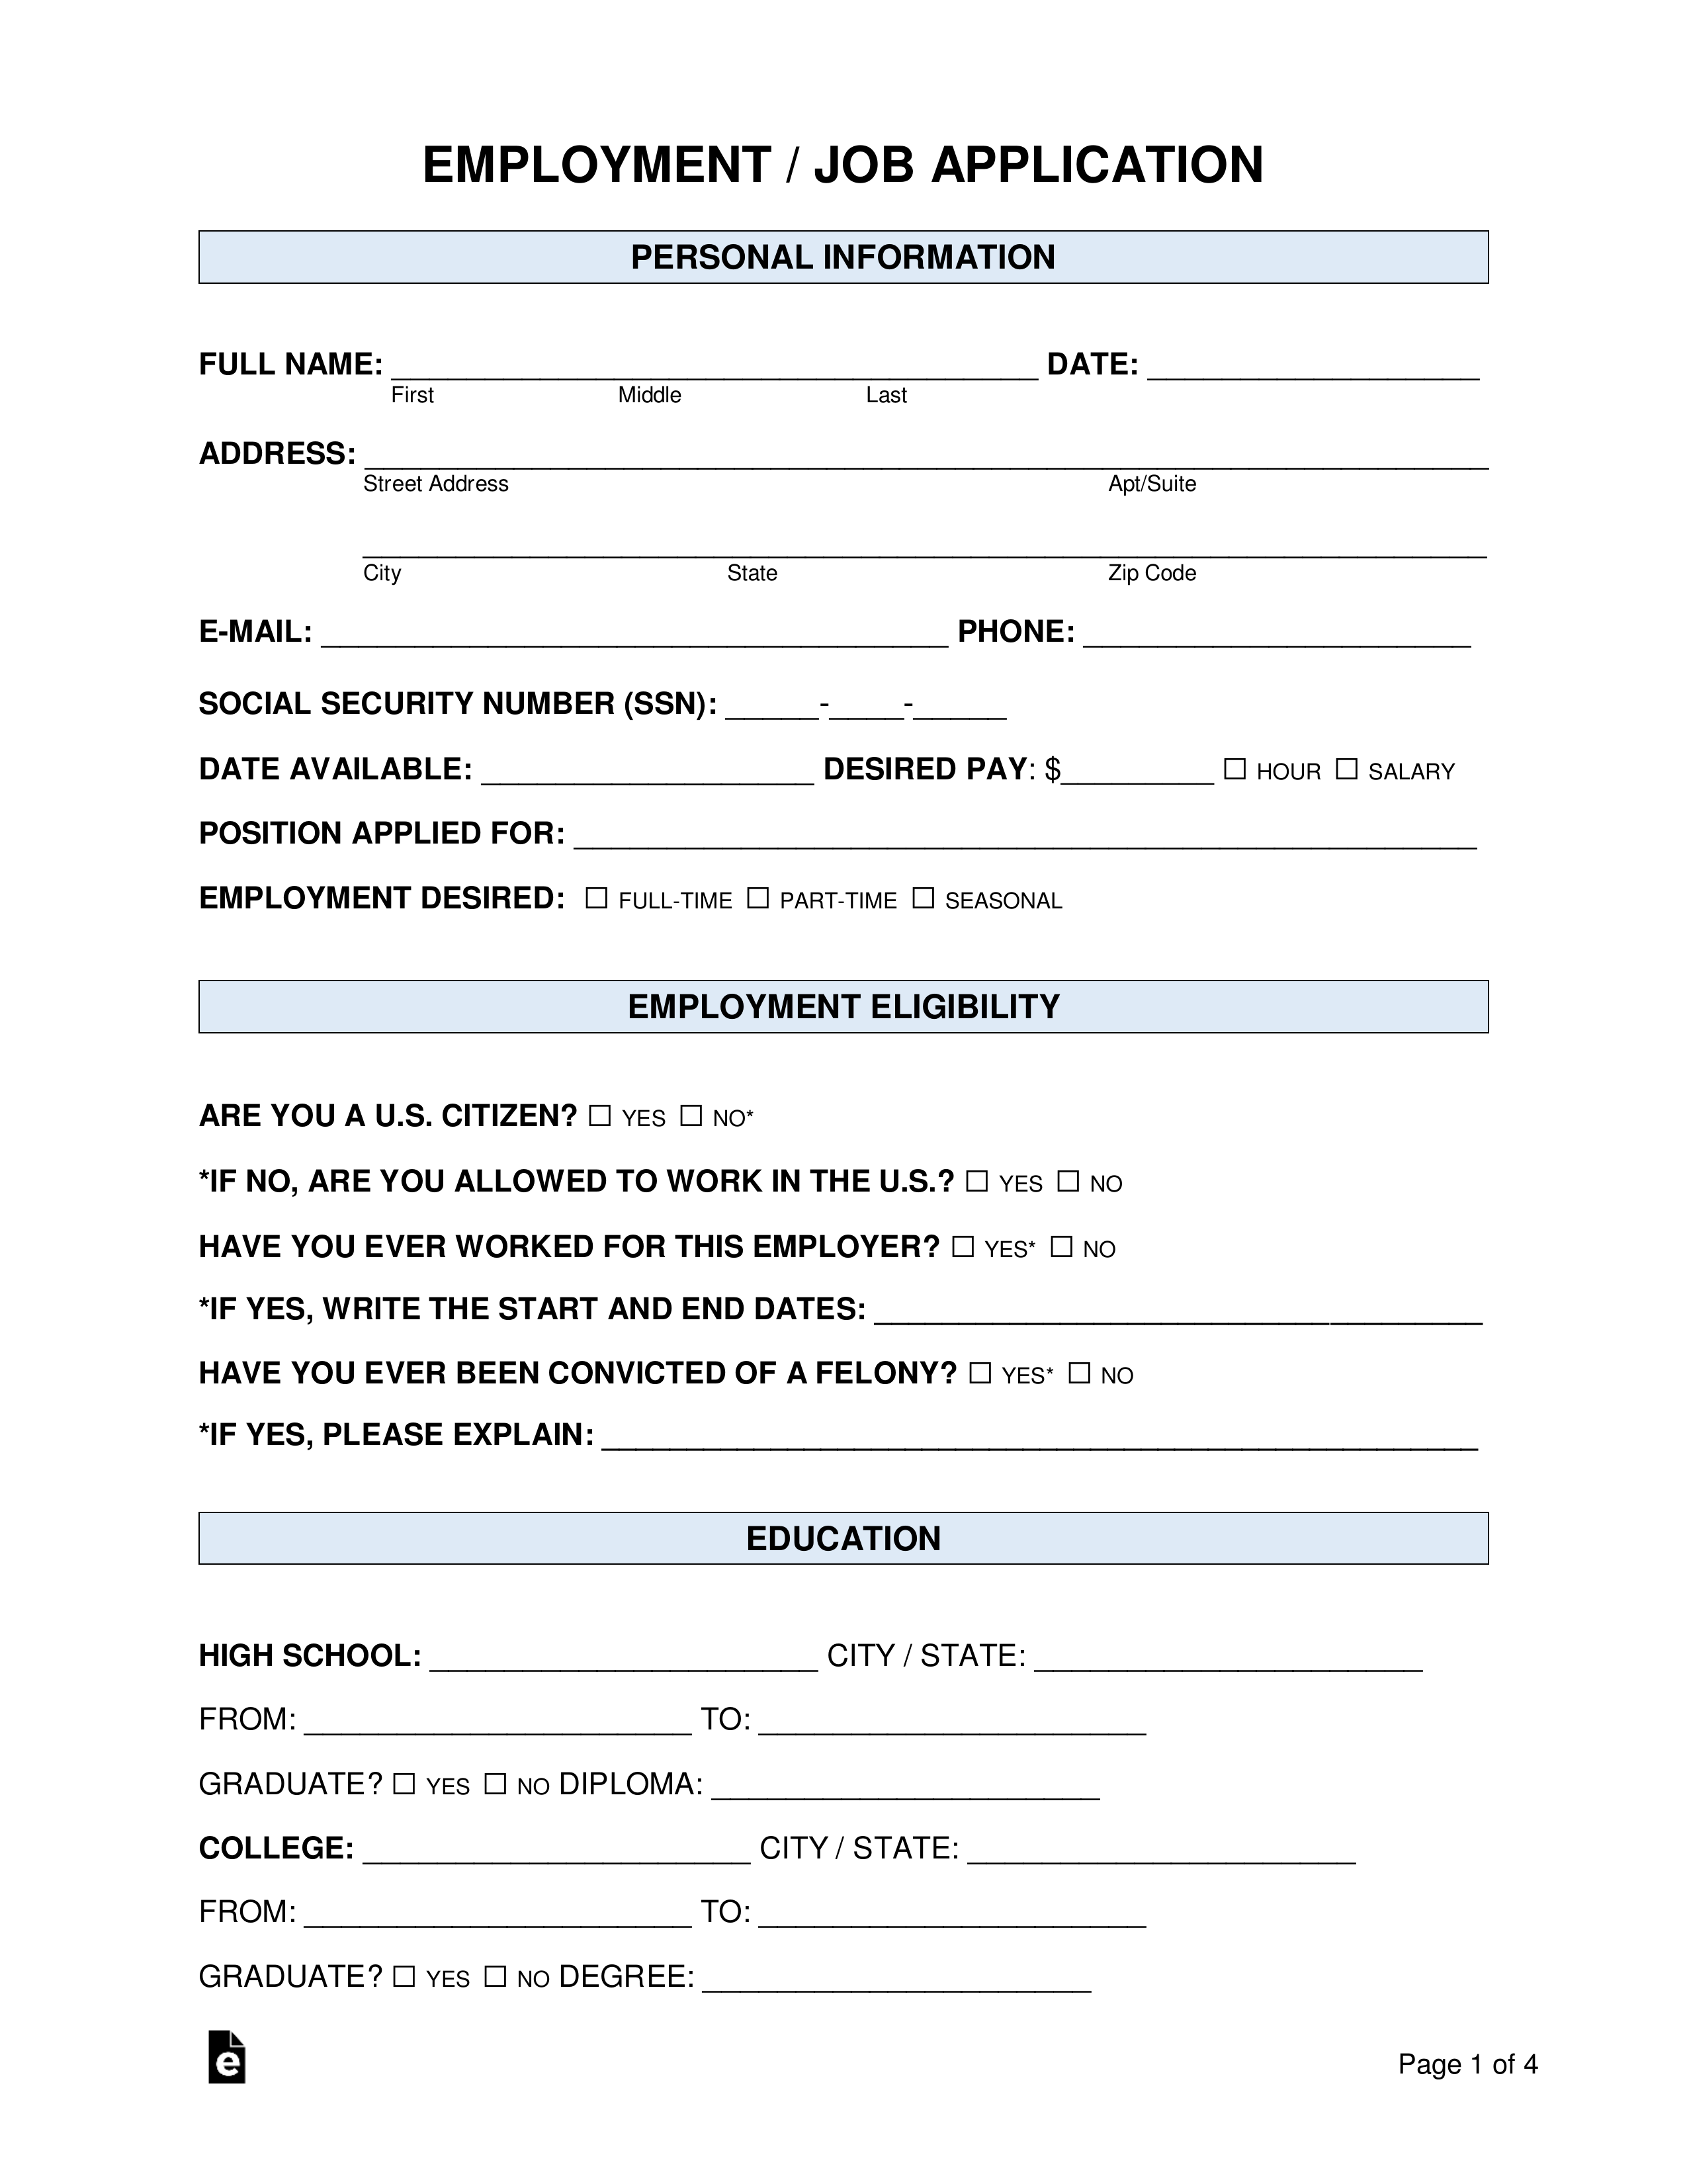 Employment Application Form Template Free from eforms.com